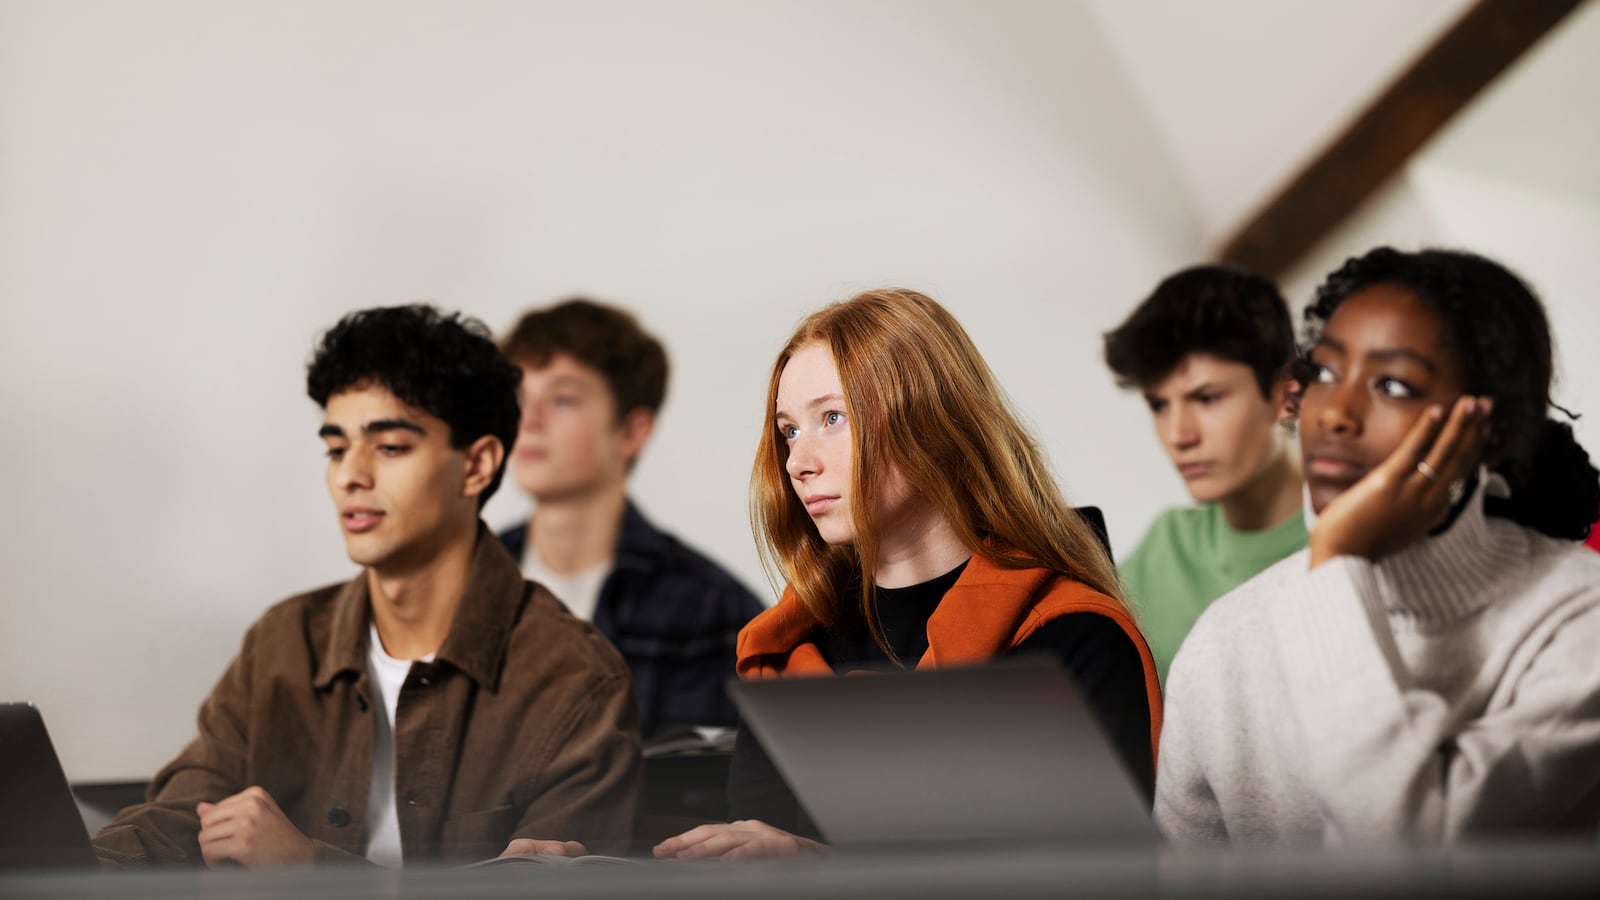 Five students sit in a classroom with a white background.